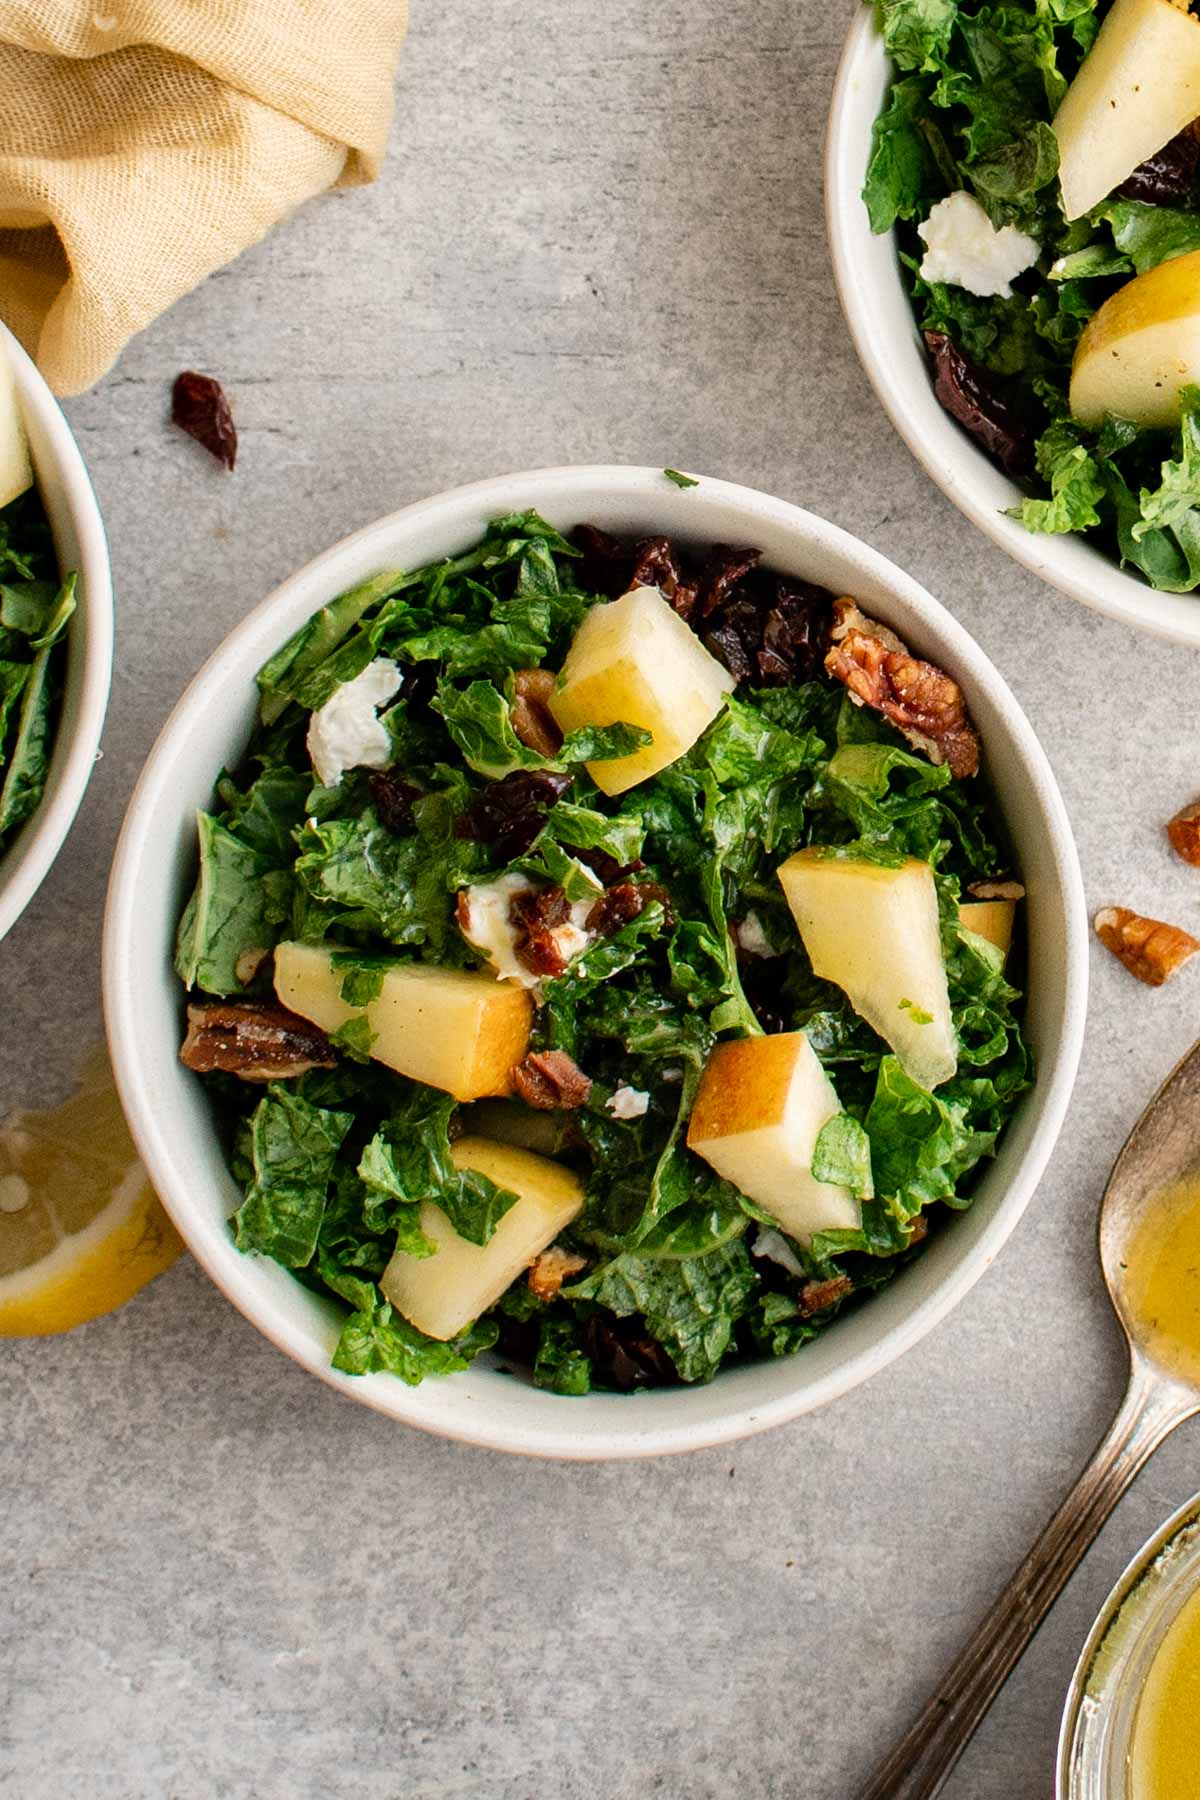 Small bowl served with kale salad.